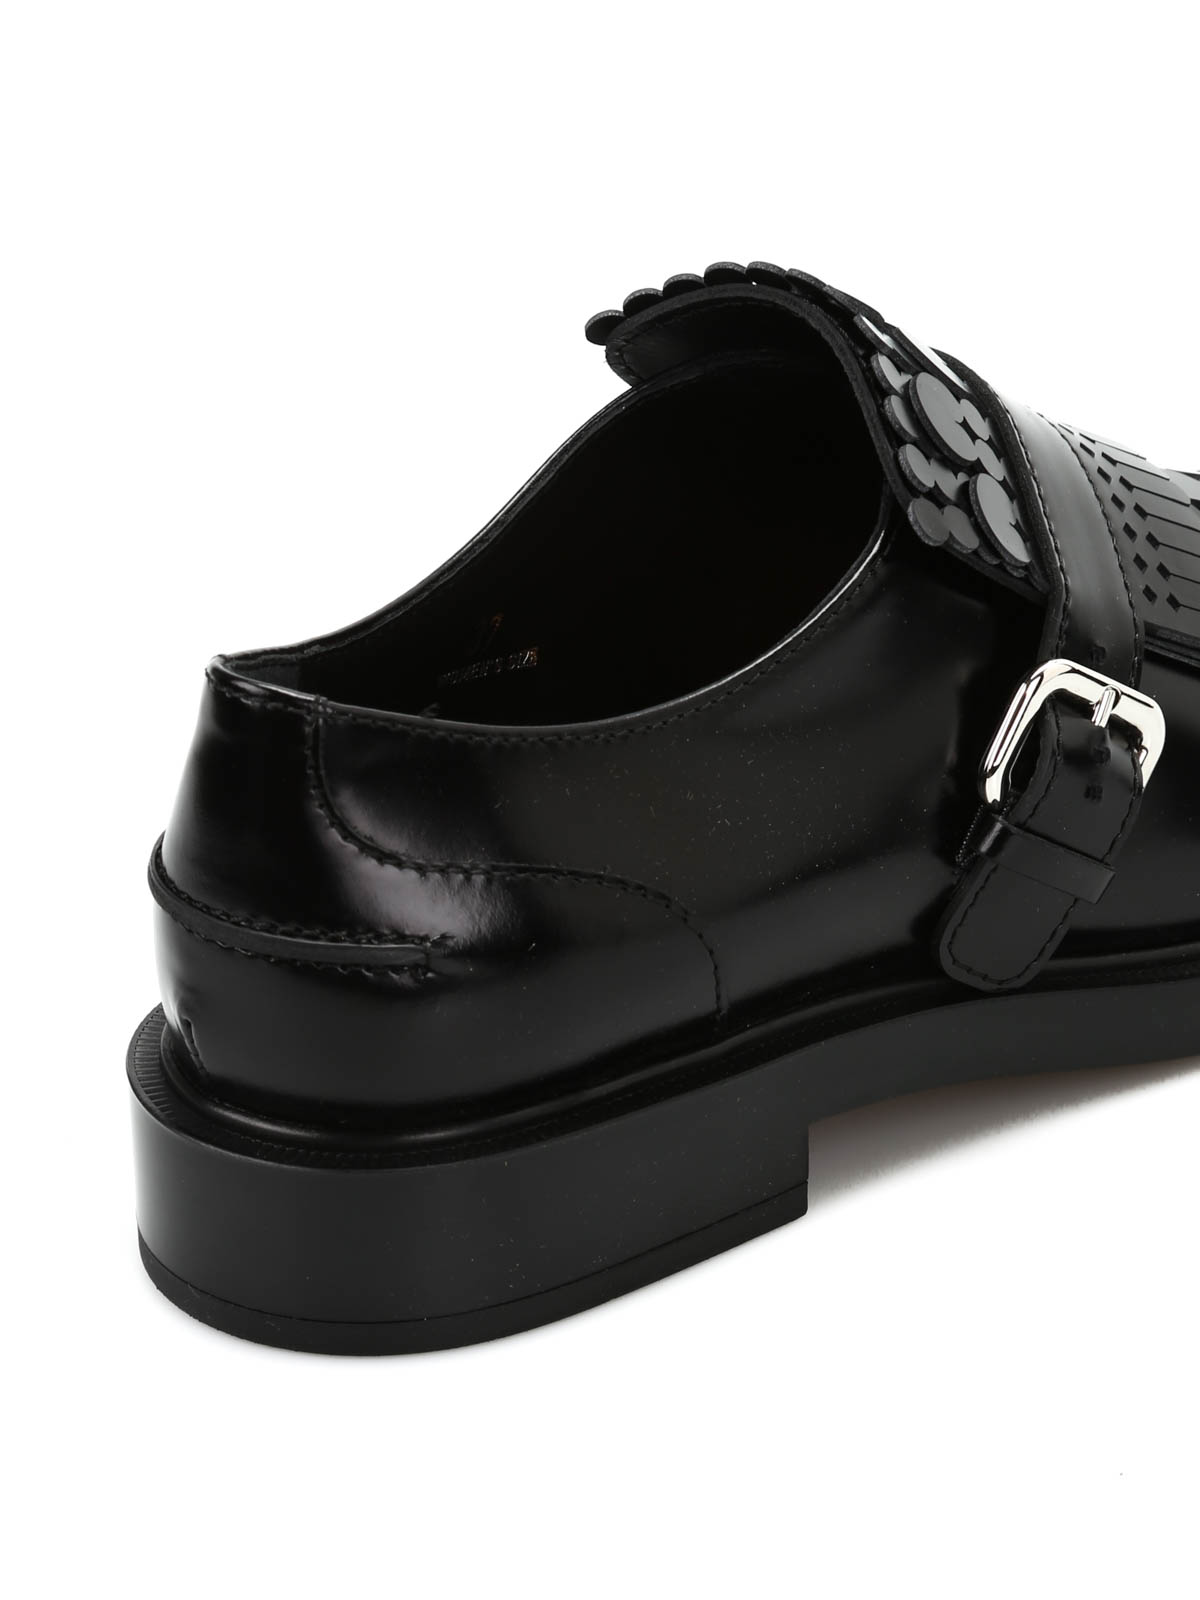 tod's gomma loafers